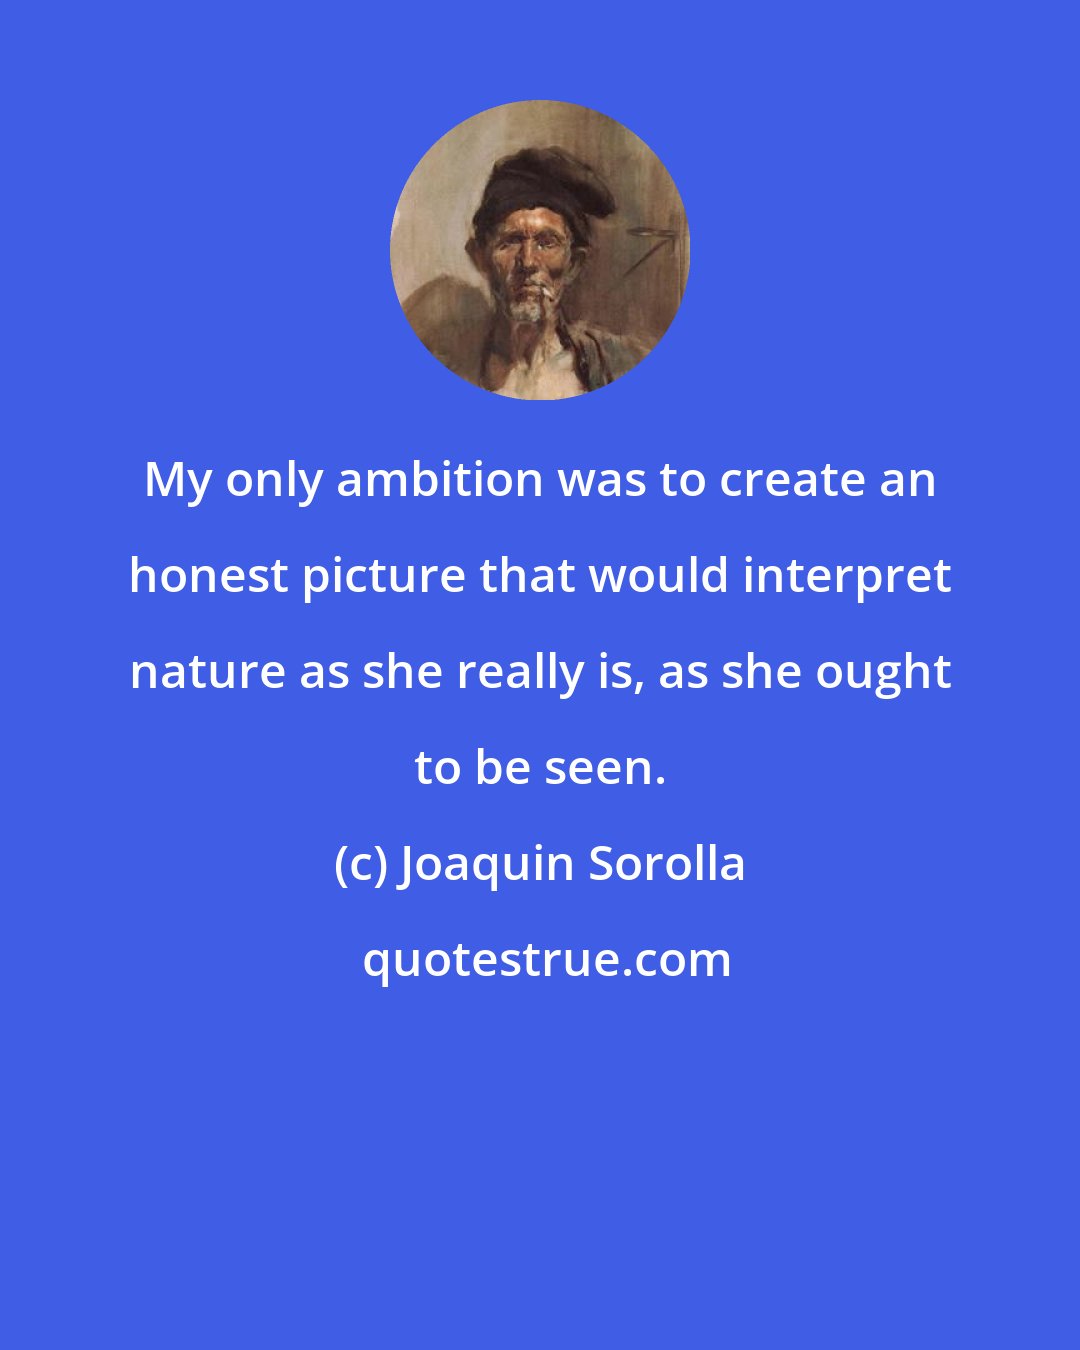 Joaquin Sorolla: My only ambition was to create an honest picture that would interpret nature as she really is, as she ought to be seen.